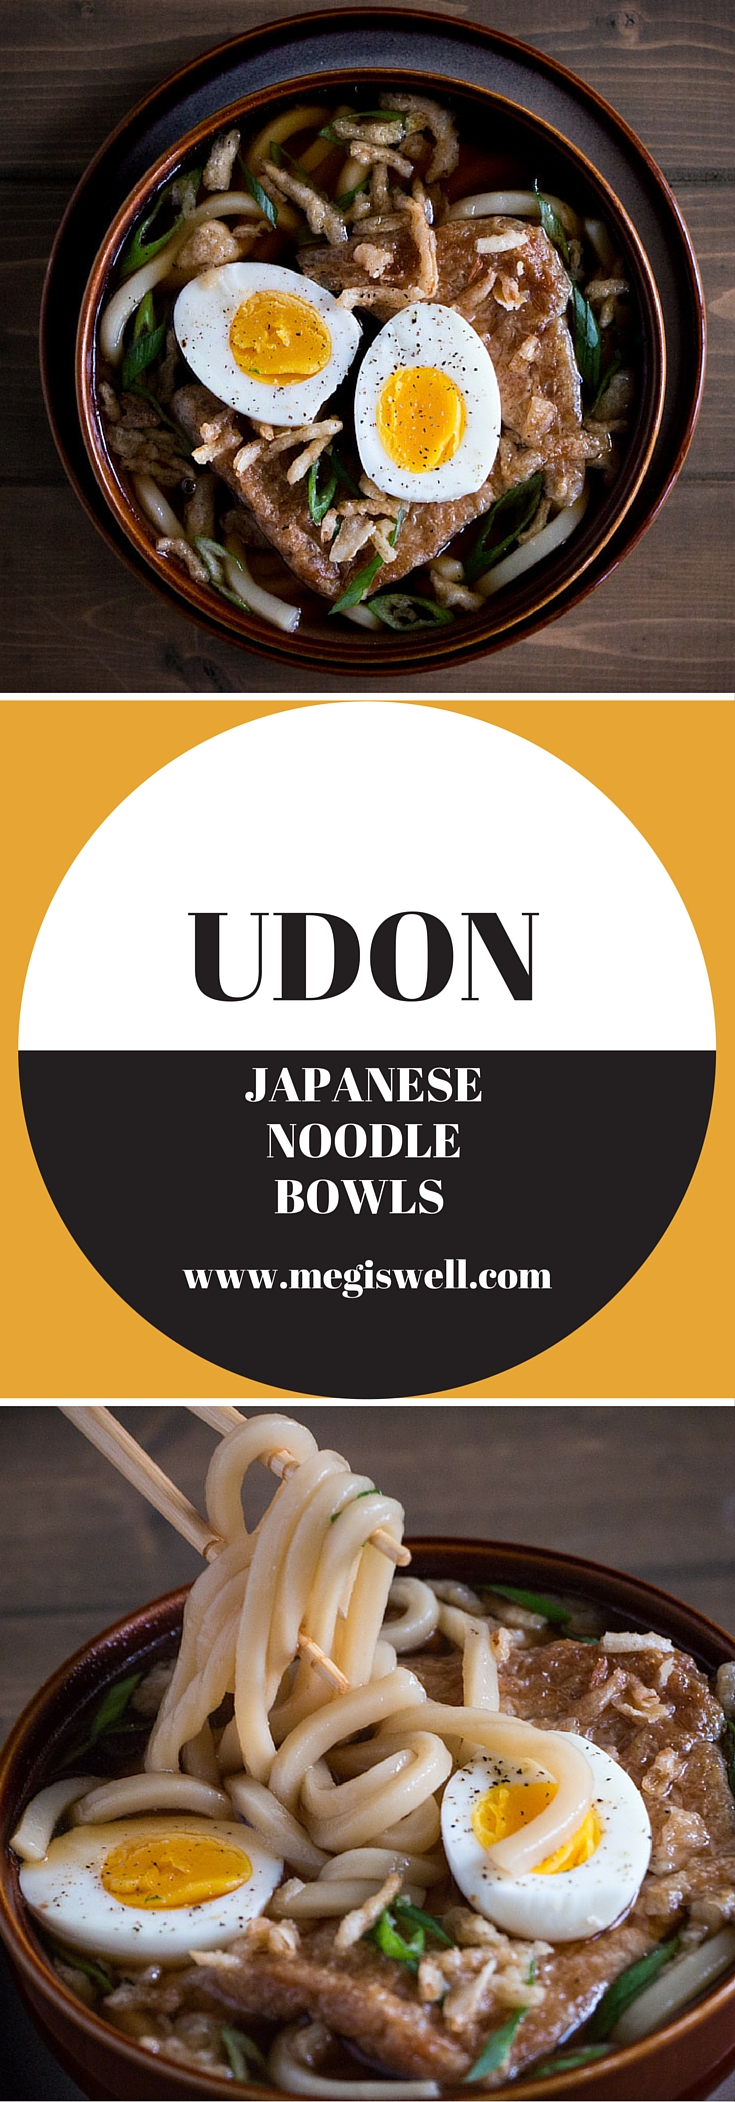 Udon is a simple combination of fat bouncy noodles and broth made from dried kelp and dried smoked tuna that creates a fast and easy meal full of umami flavor. 